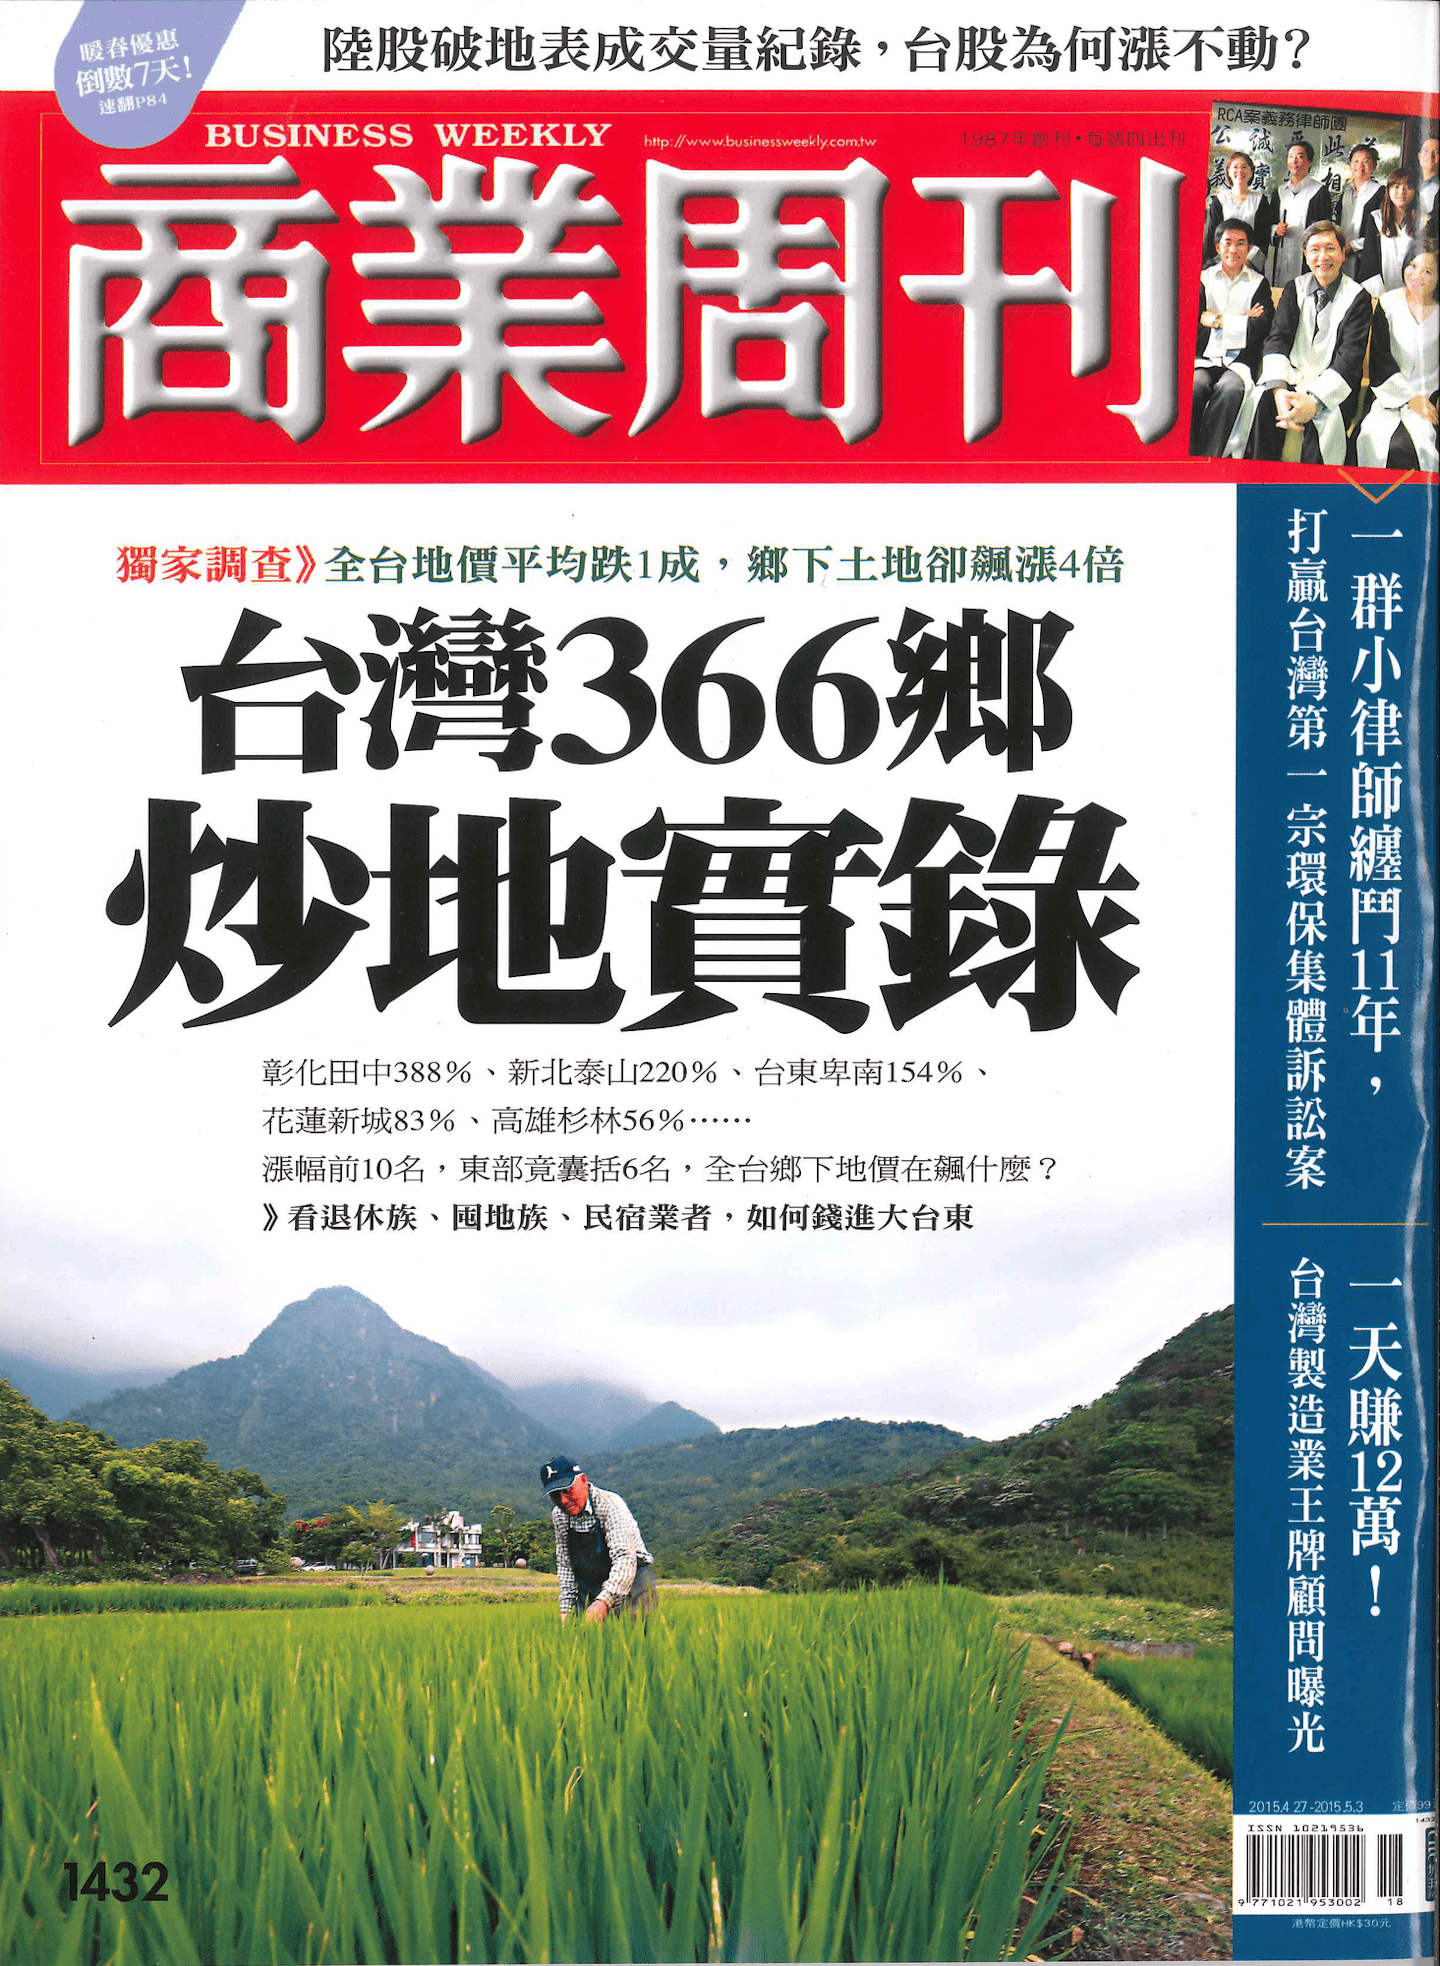 Business Weekly No.1432